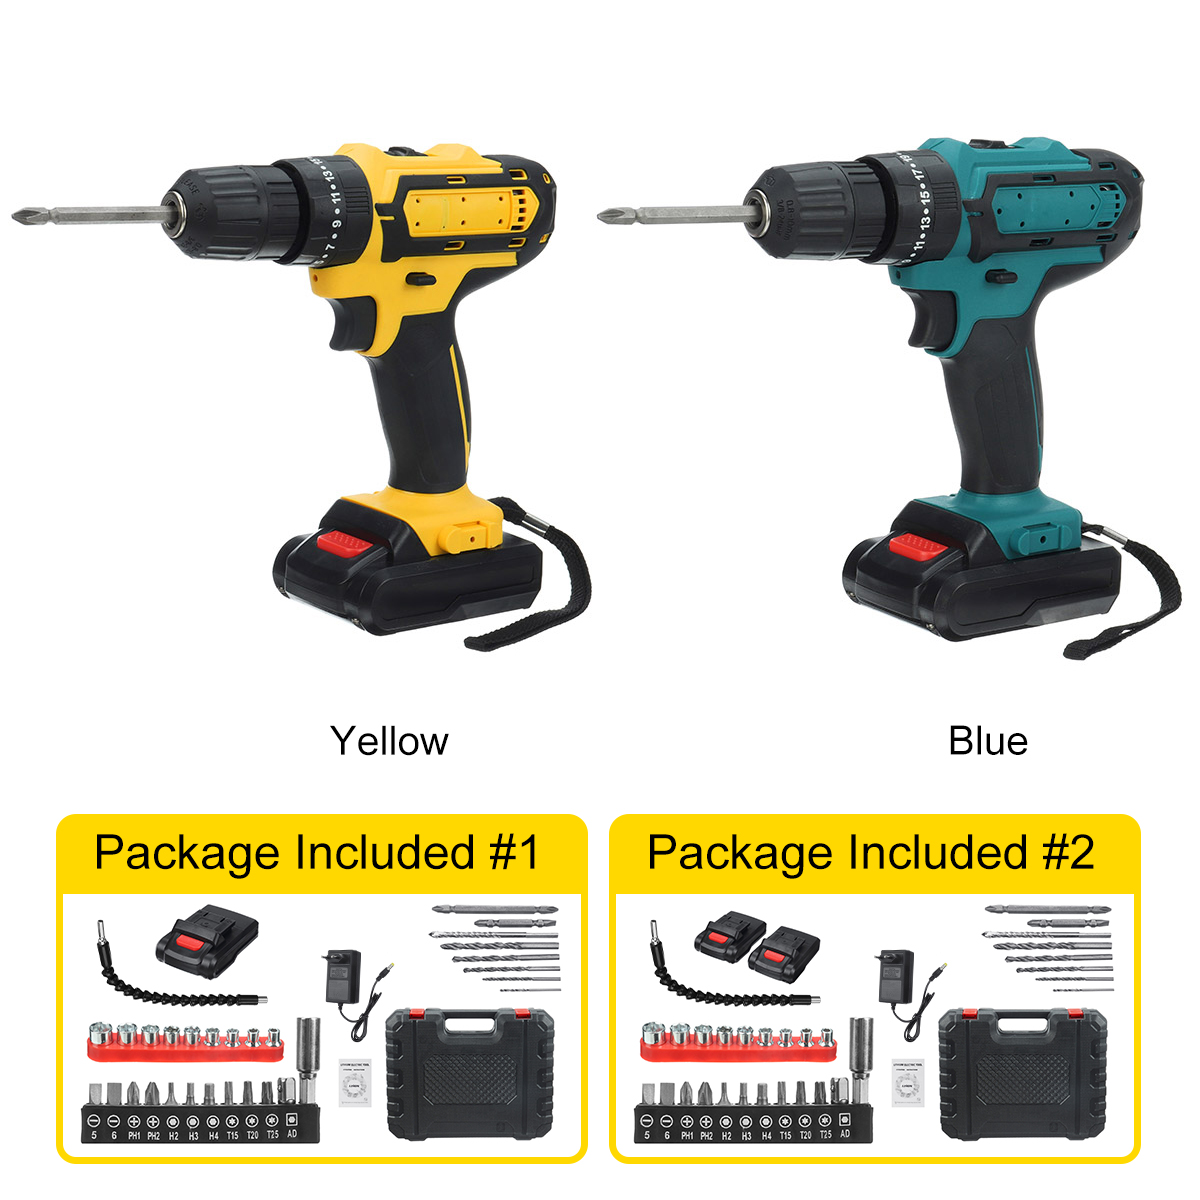 Cordless-Rechargeable-Electric-Drill-Screwdriver-LED-Portable-Metal-Wood-Drilling-Tool-W-12pcs-Batte-1848720-10